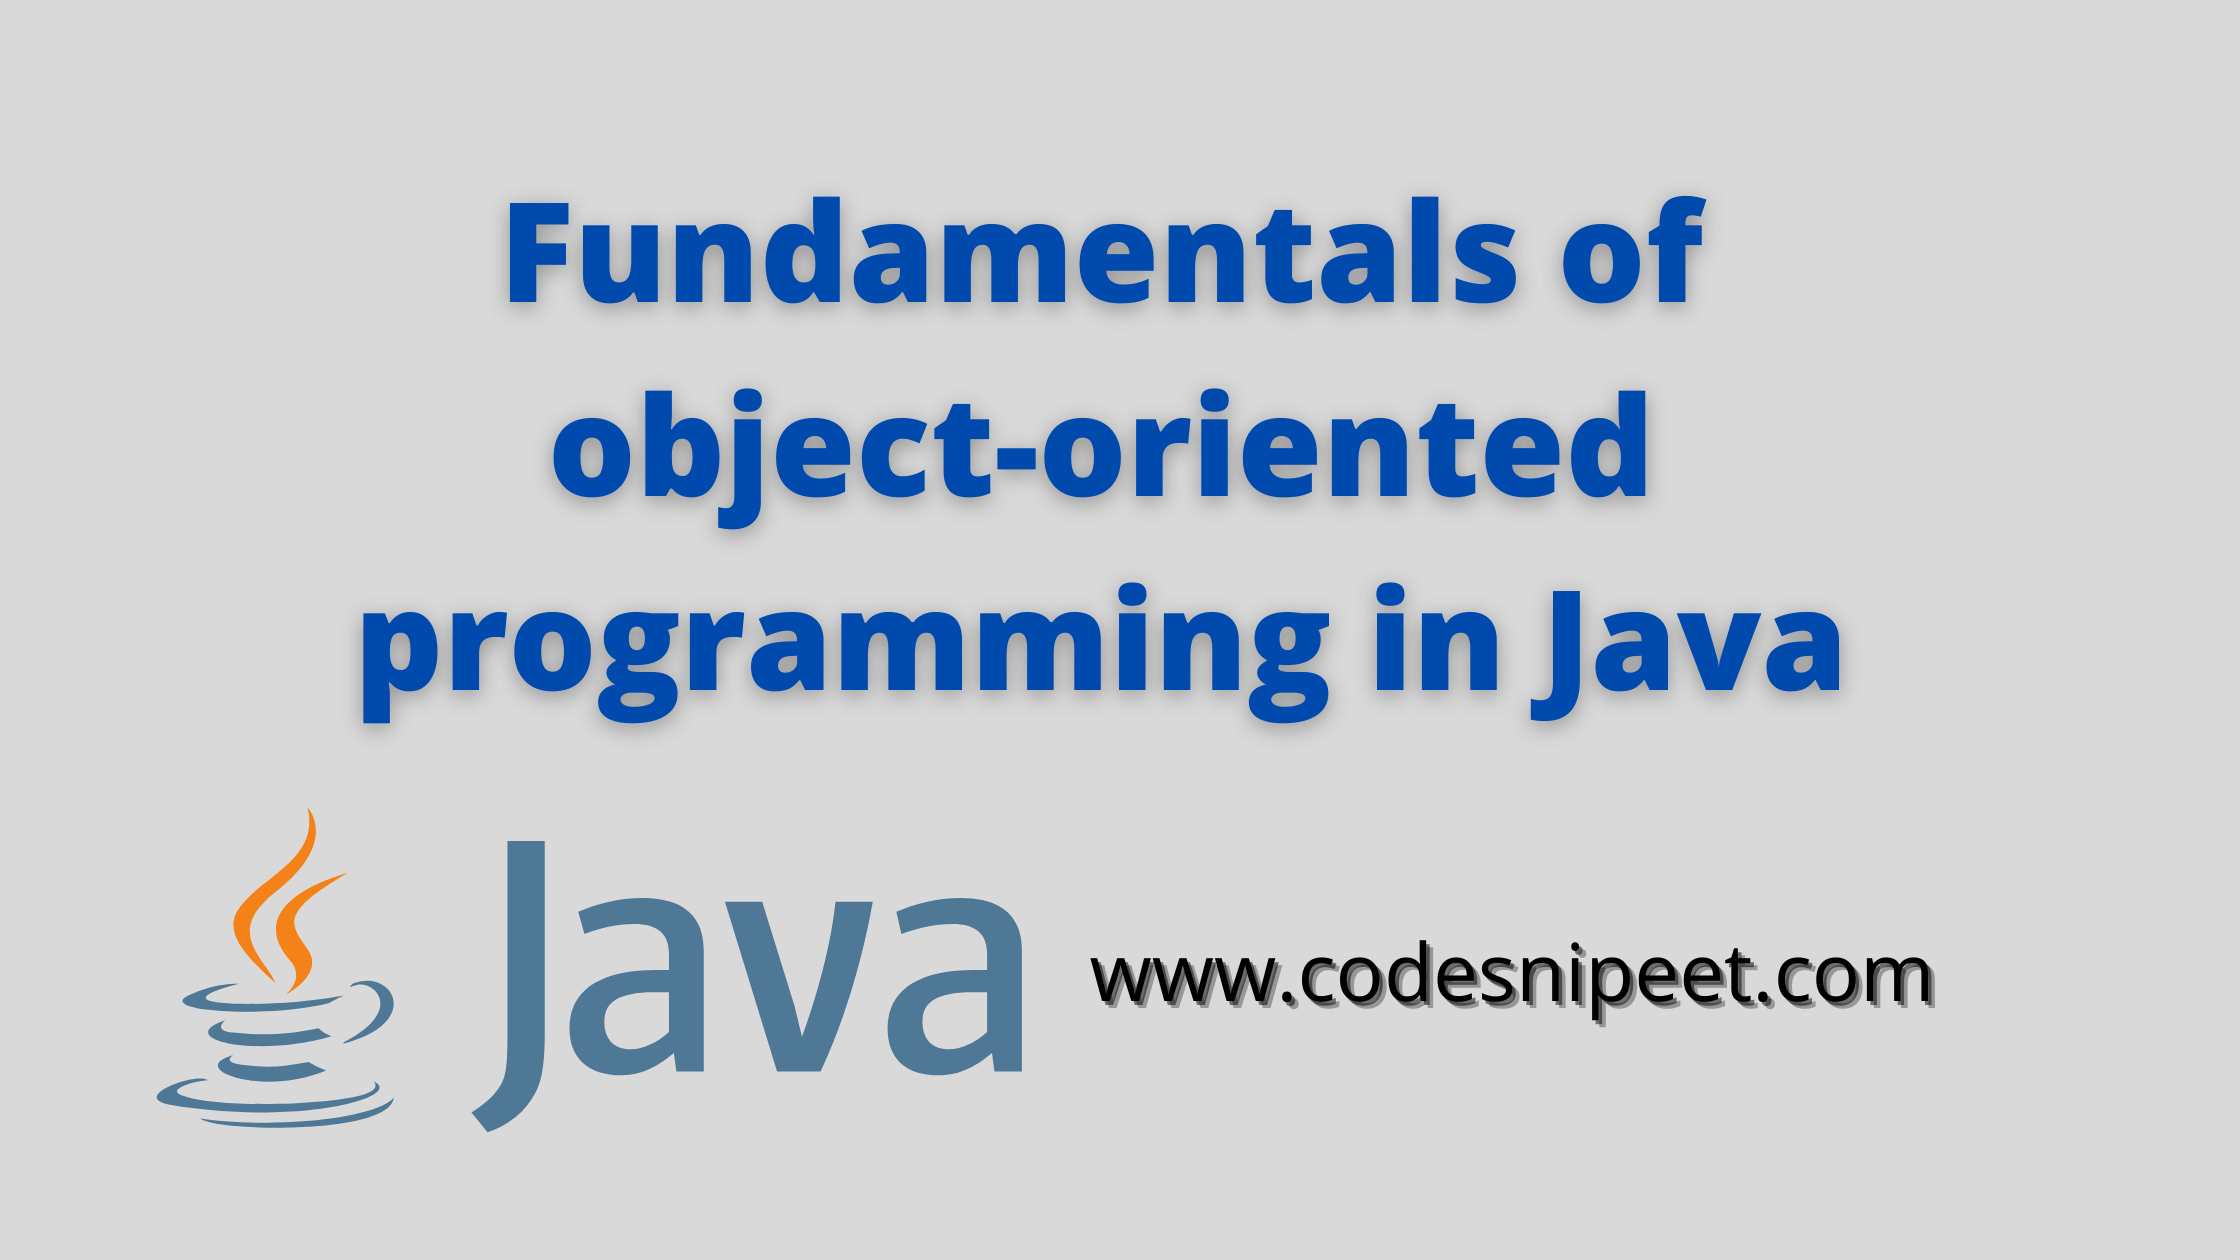 You are currently viewing Fundamentals of object-oriented programming in Java